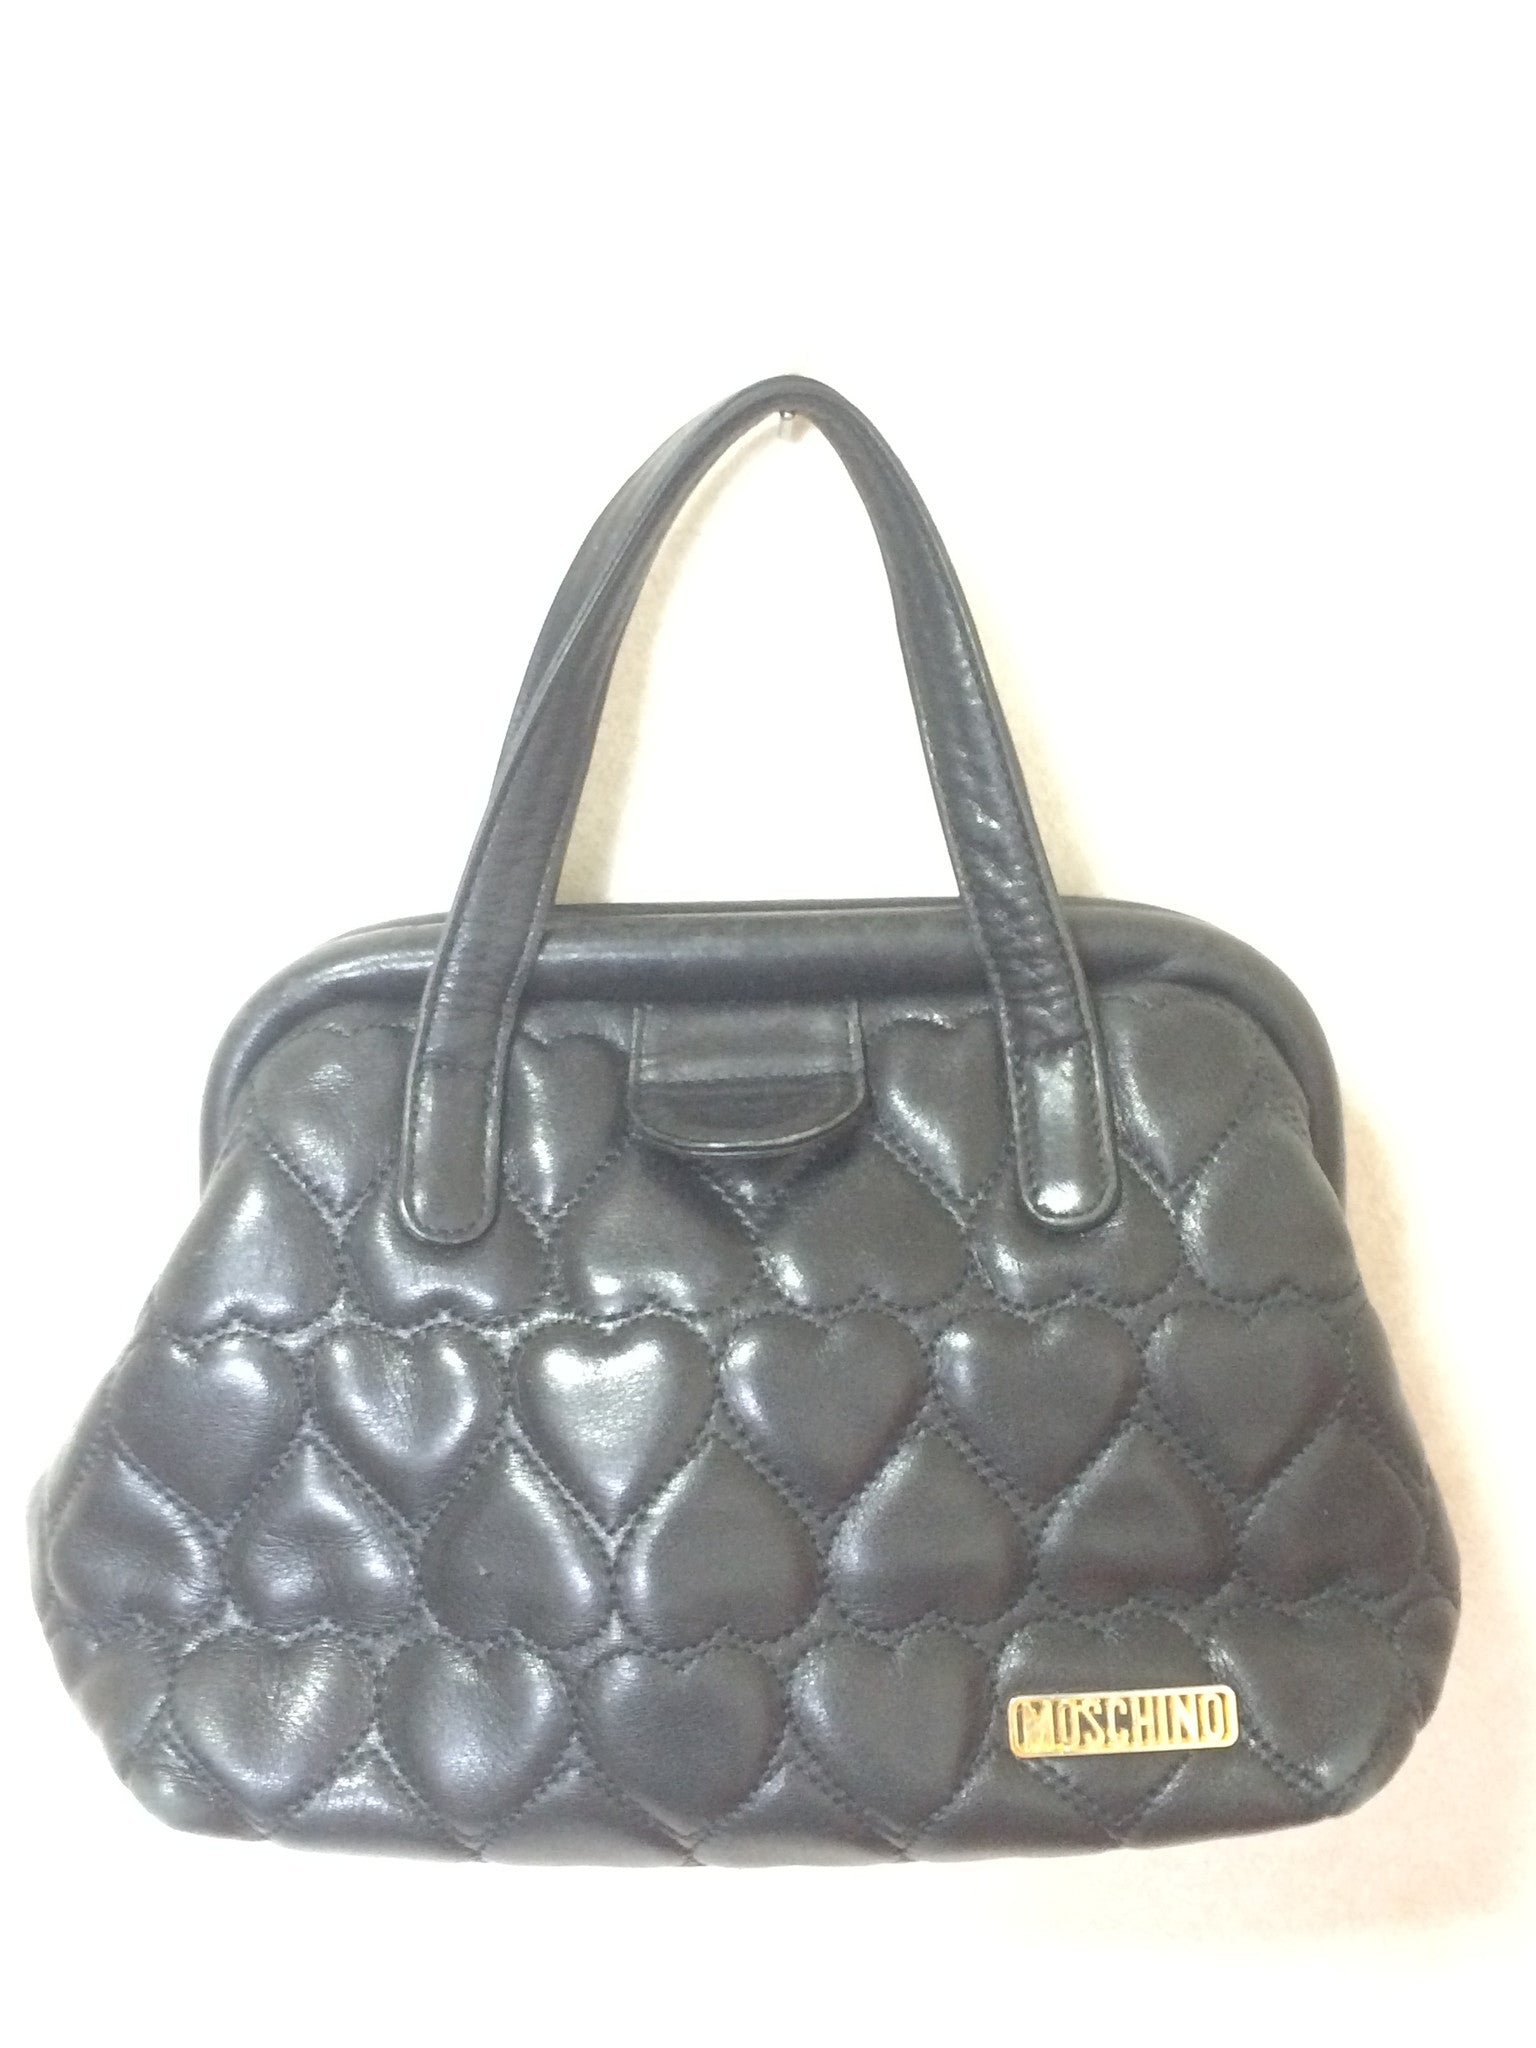 Moschino, Bags, Vintage Moschino Red Wall Bag Black Lightweight Nylon  Made In Italy